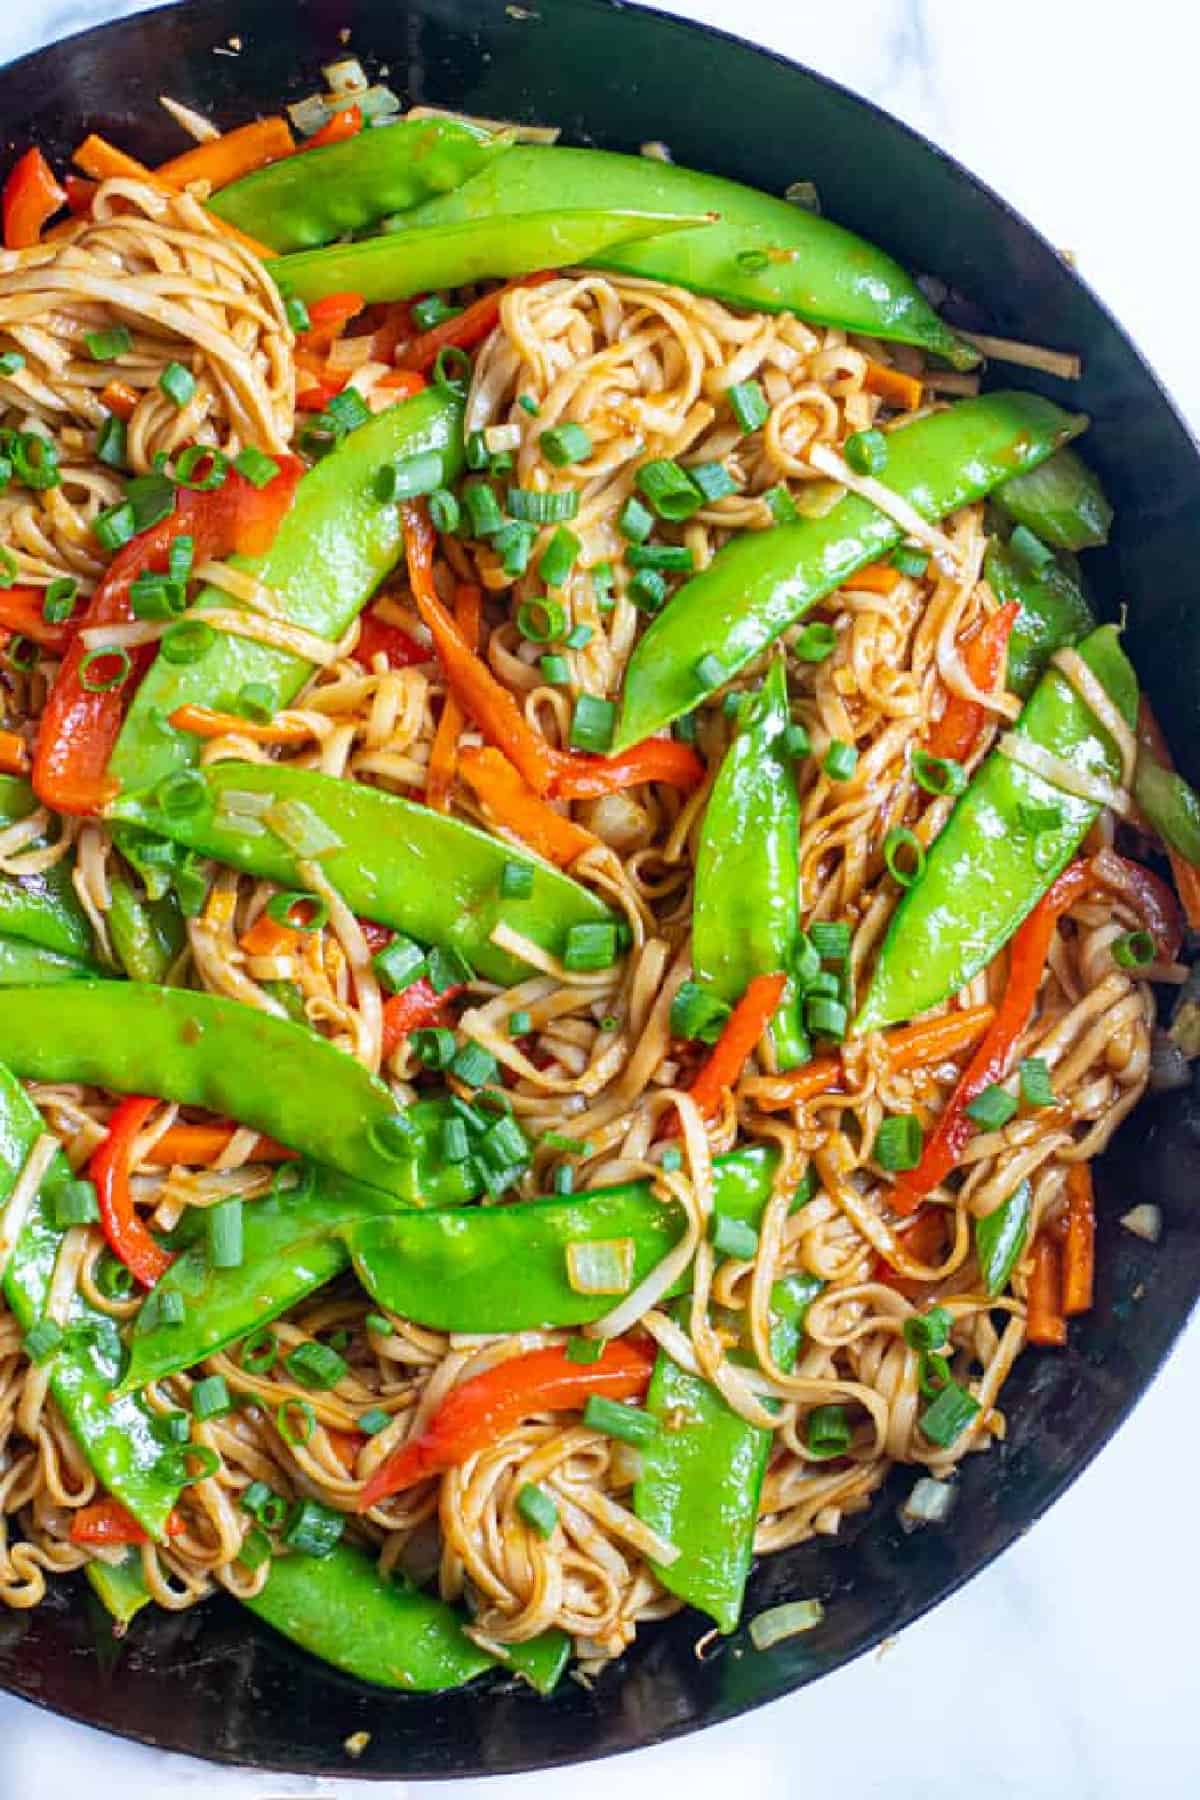 a pan with cooked veggies and noodles.